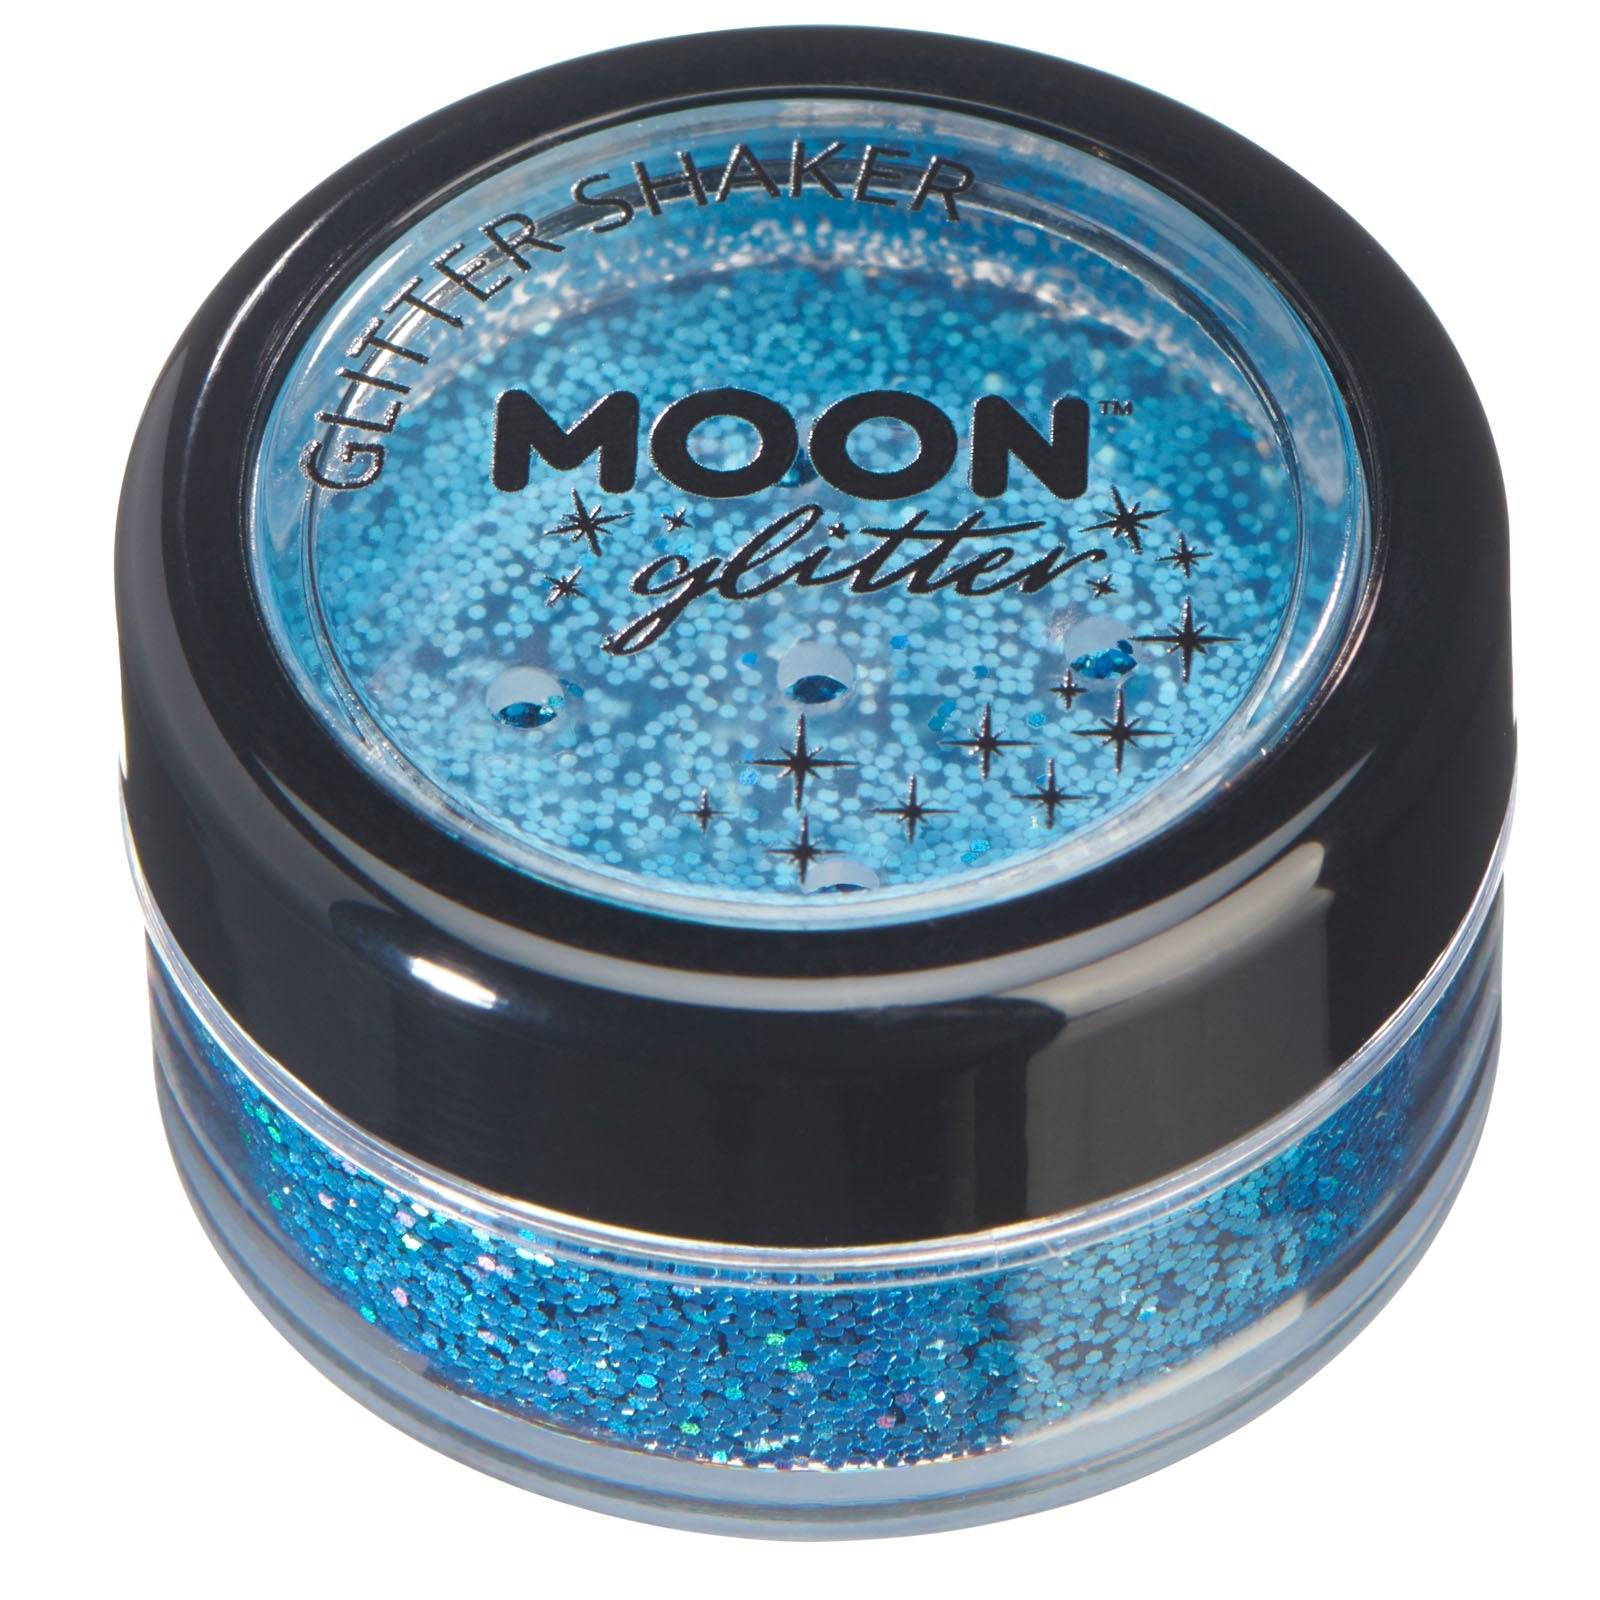 Blue - Holographic Fine Face & Body Glitter Shaker, 5g. Cosmetically certified, FDA & Health Canada compliant, cruelty free and vegan.